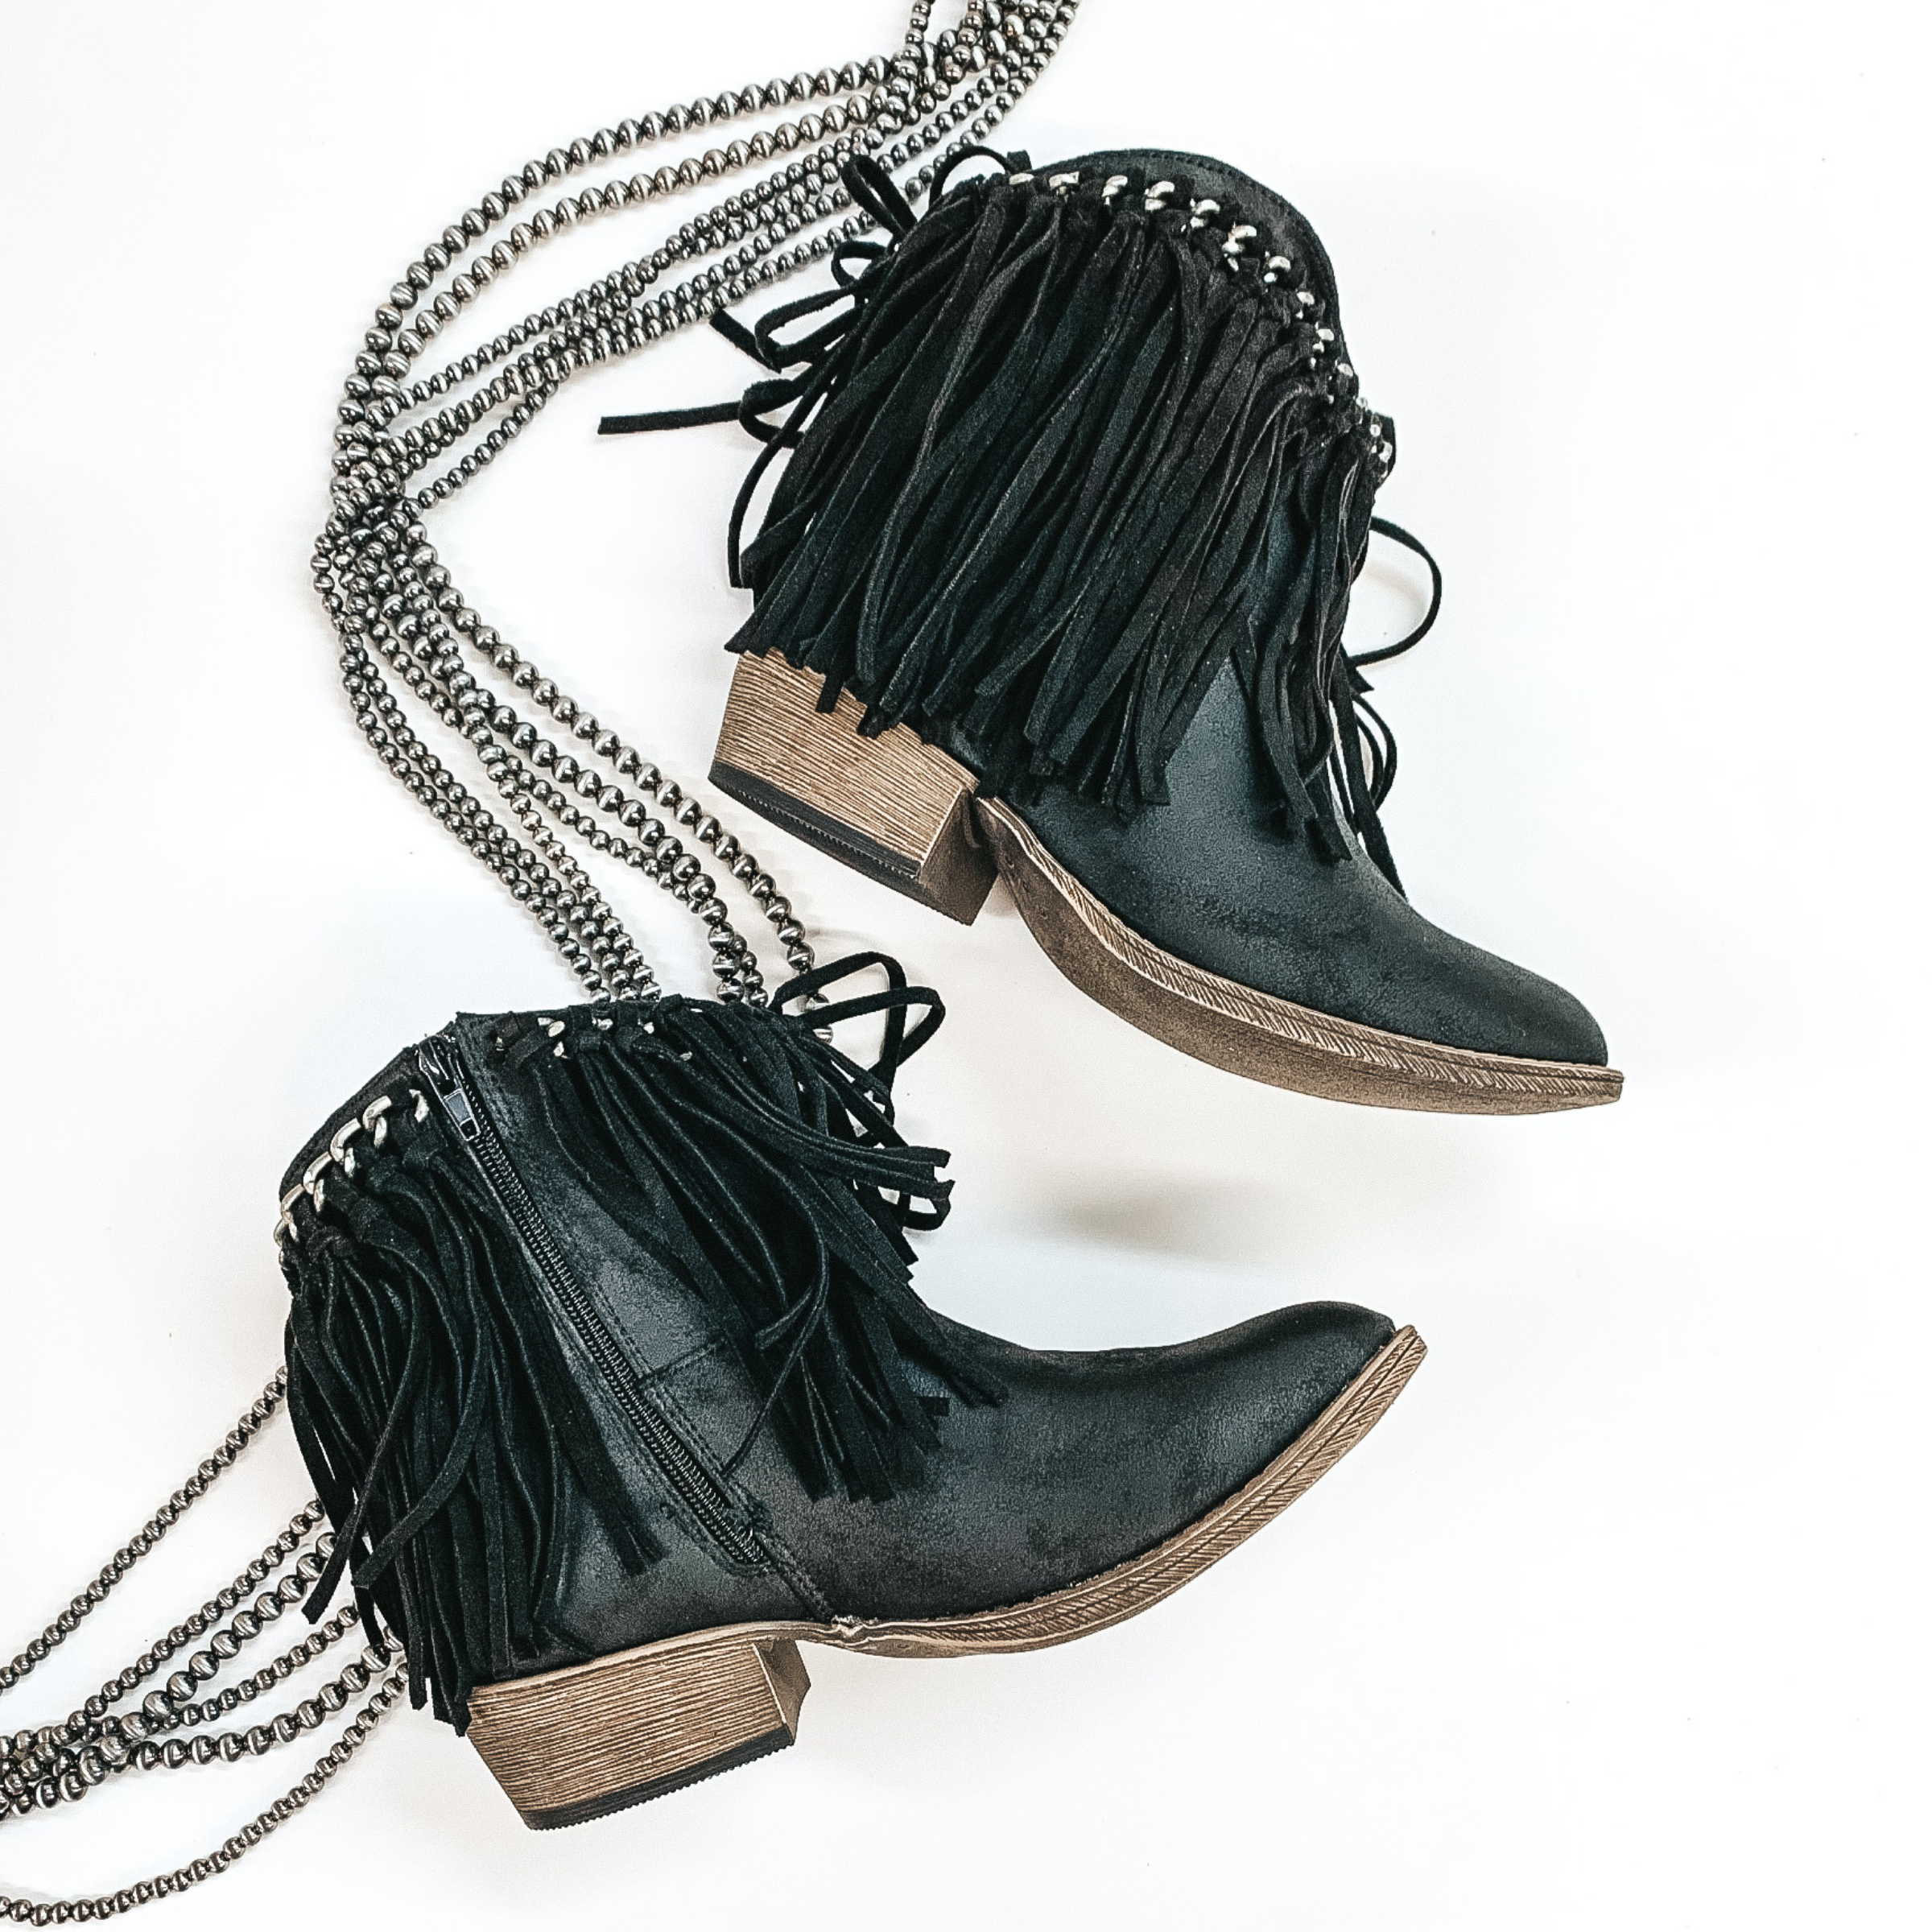 Very G | Rebel Girl Heeled Ankle Booties with Fringe in Black - Giddy Up Glamour Boutique